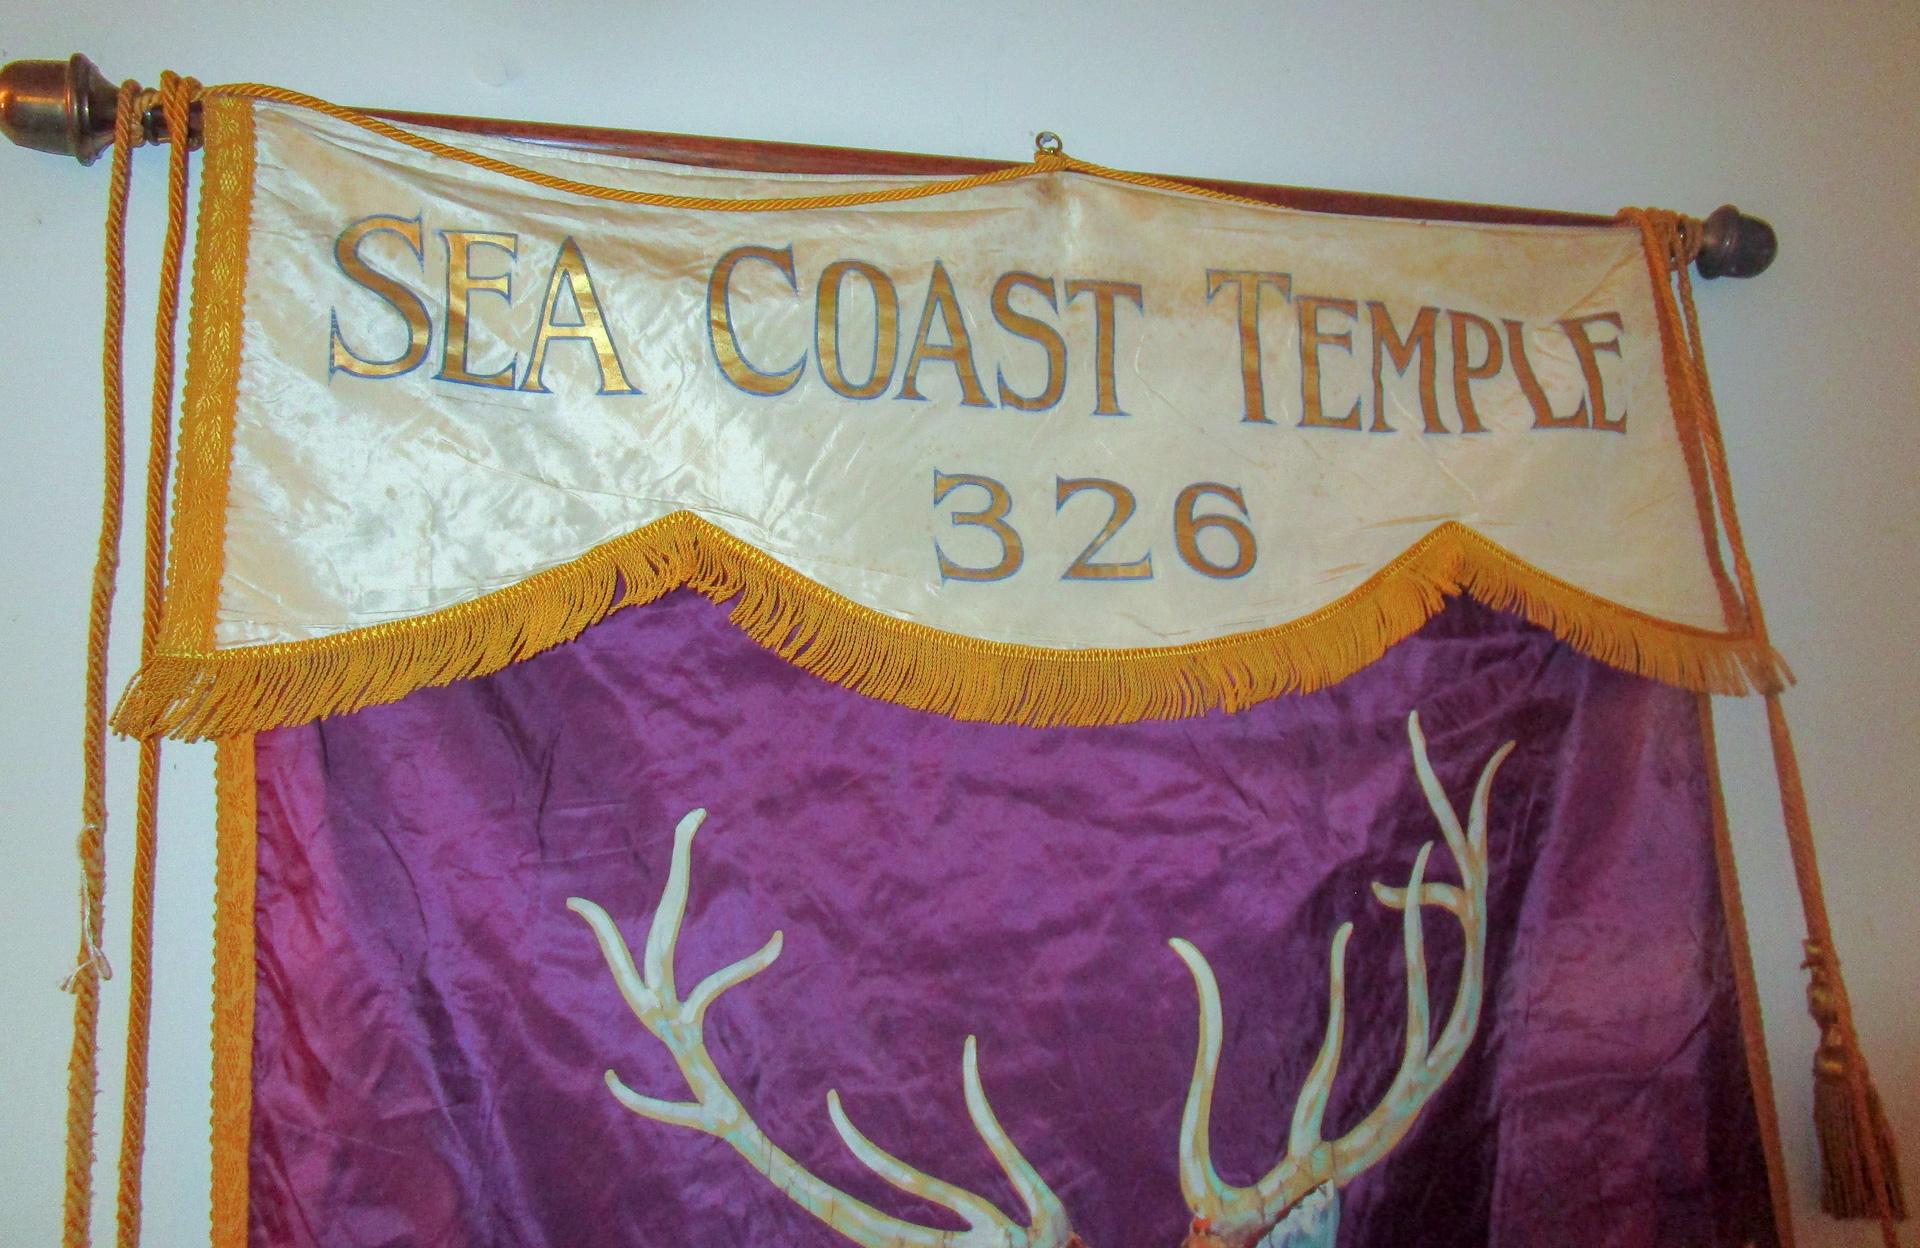 Large very detailed banner from the Elks Lodge hangs on a long brass rod with fringe and tassels.The I.B.P.O. stands for the Improved Benevolent and Protective Order of Elks of the World. This particular one is from the Atlantic Seacoast Chapter,